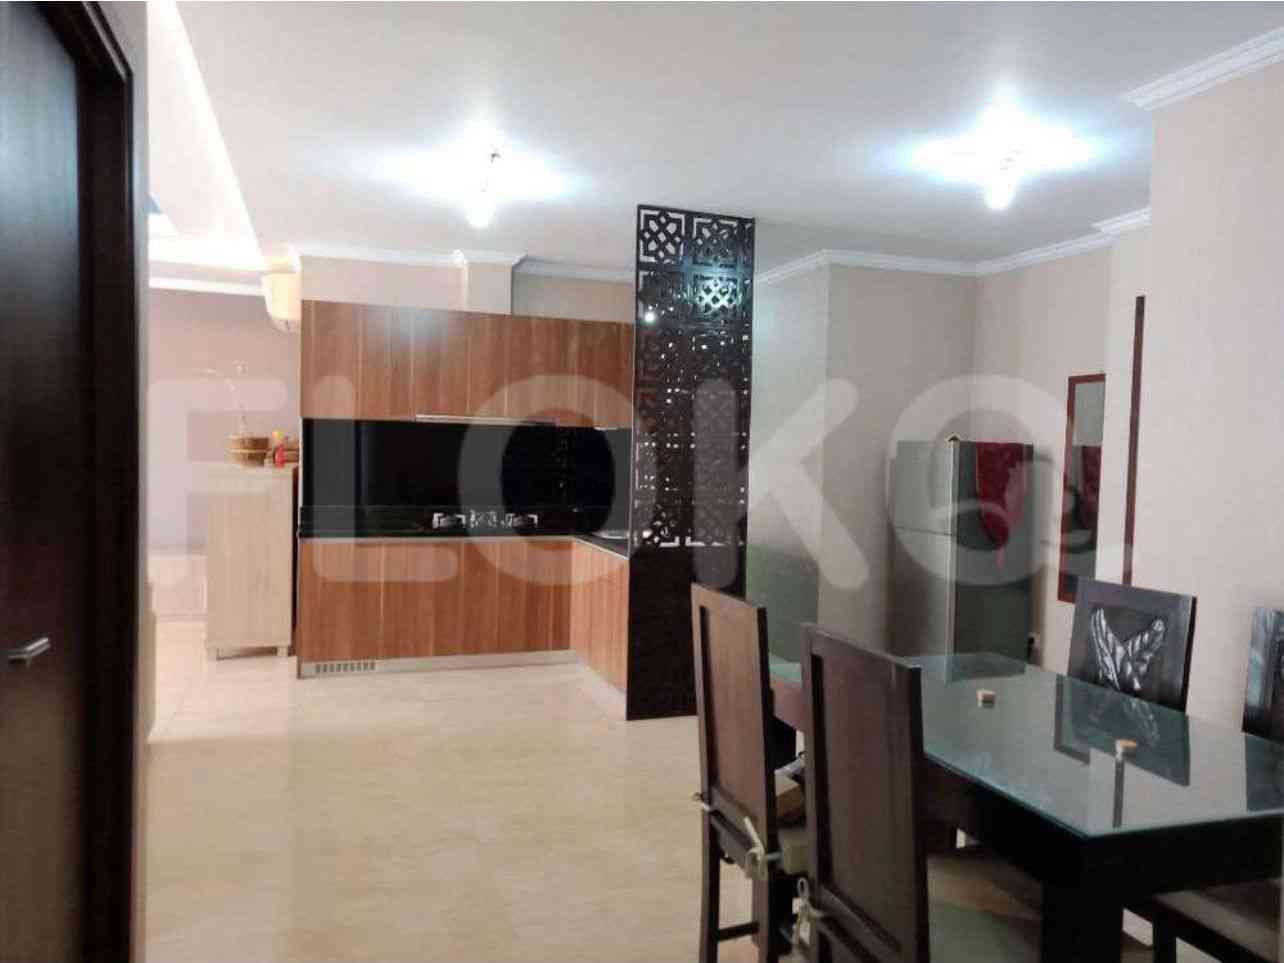 3 Bedroom on 20th Floor for Rent in Lavanue Apartment - fpad07 2